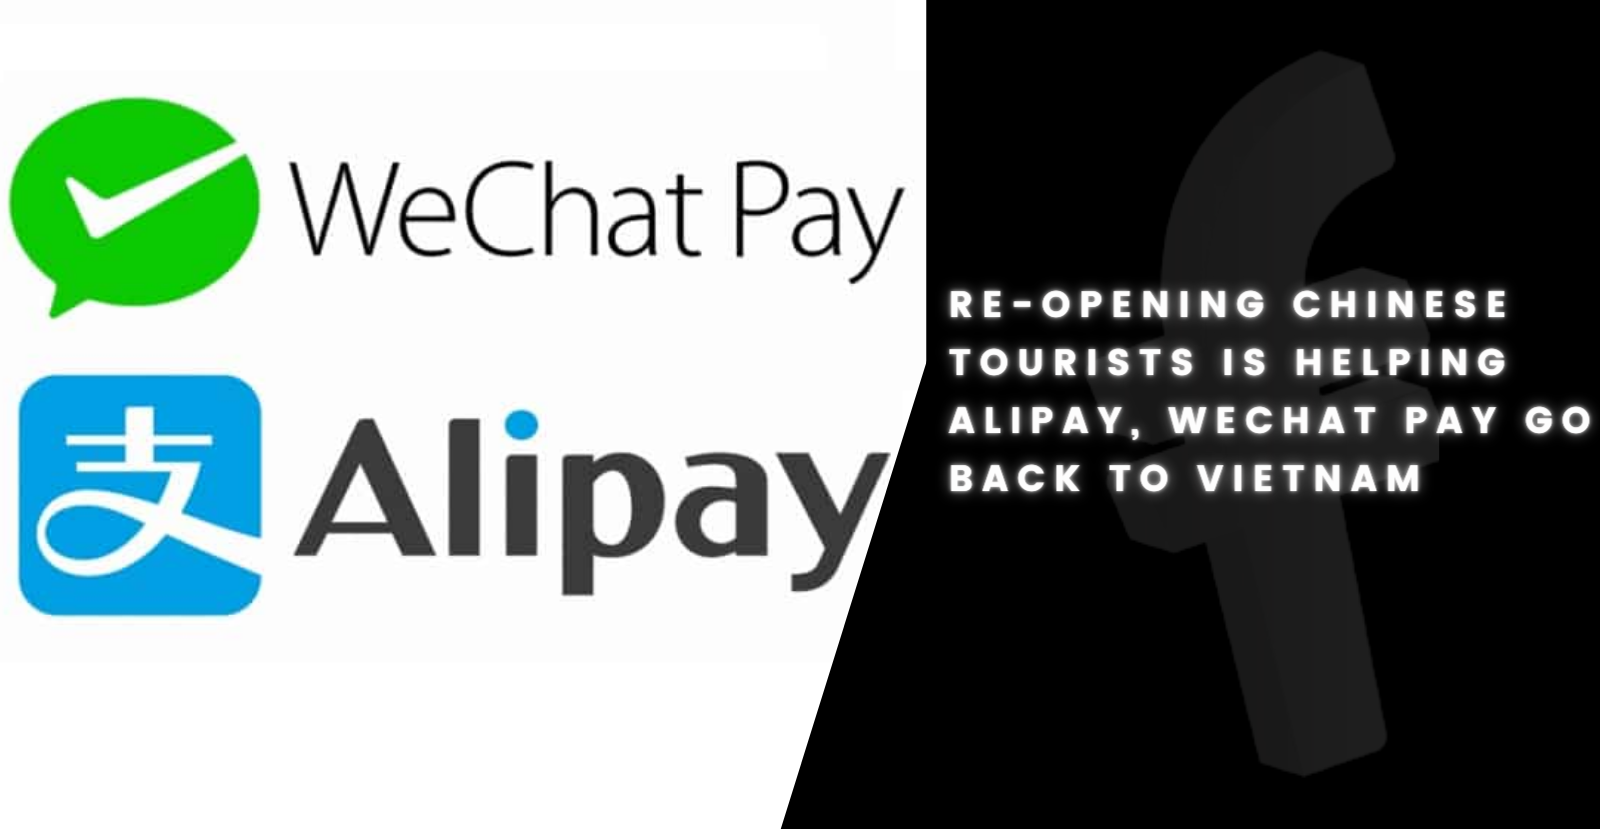 Re-opening Chinese Tourists is helping Alipay, Wechat Pay go back to Vietnam